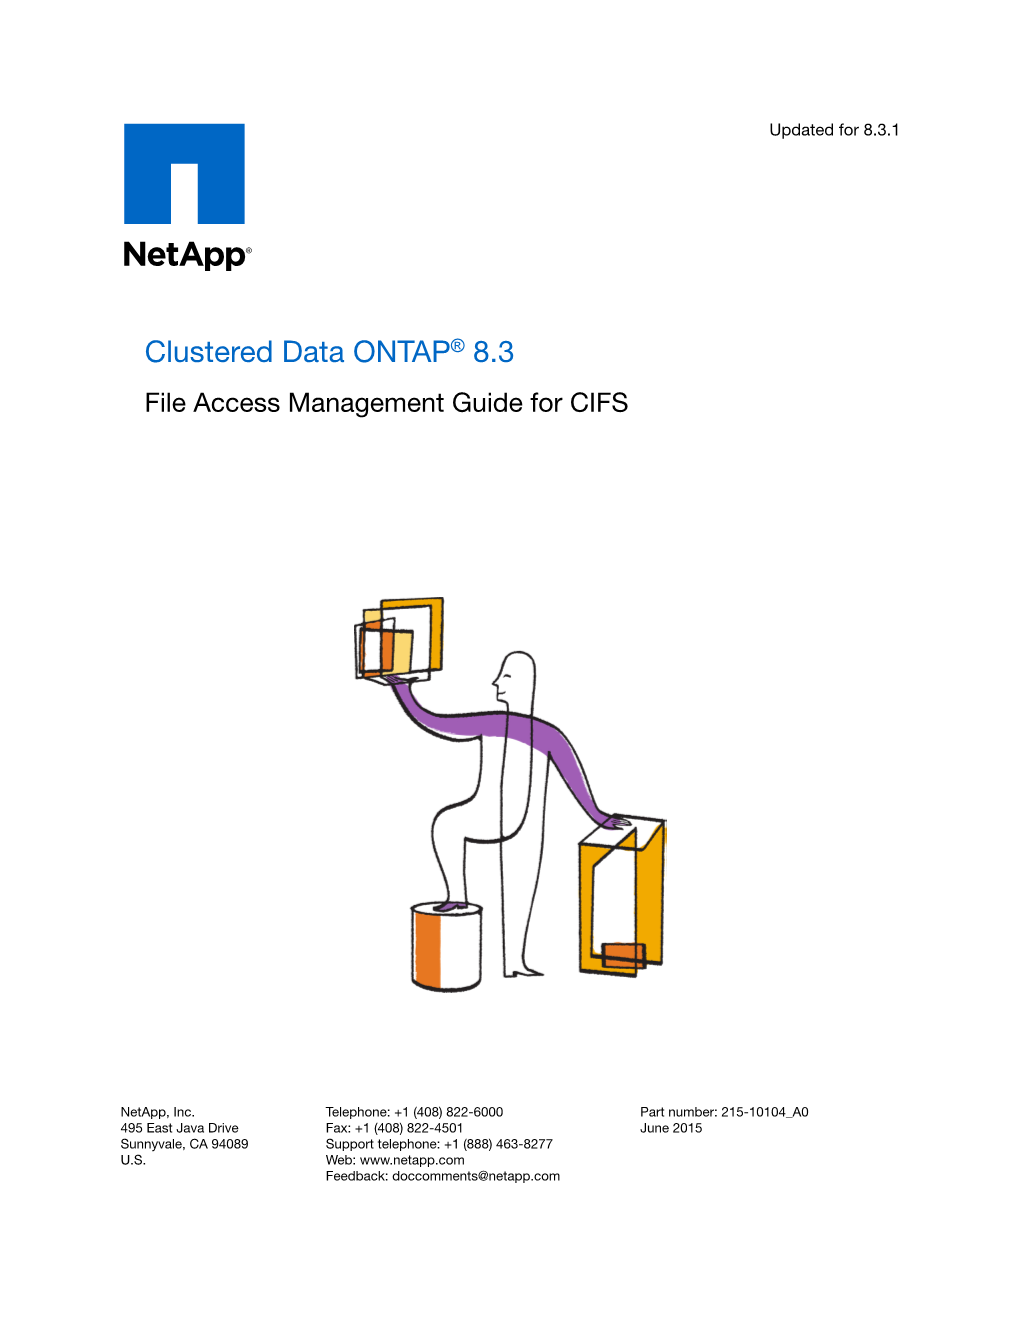 Clustered Data ONTAP® 8.3 File Access Management Guide for CIFS